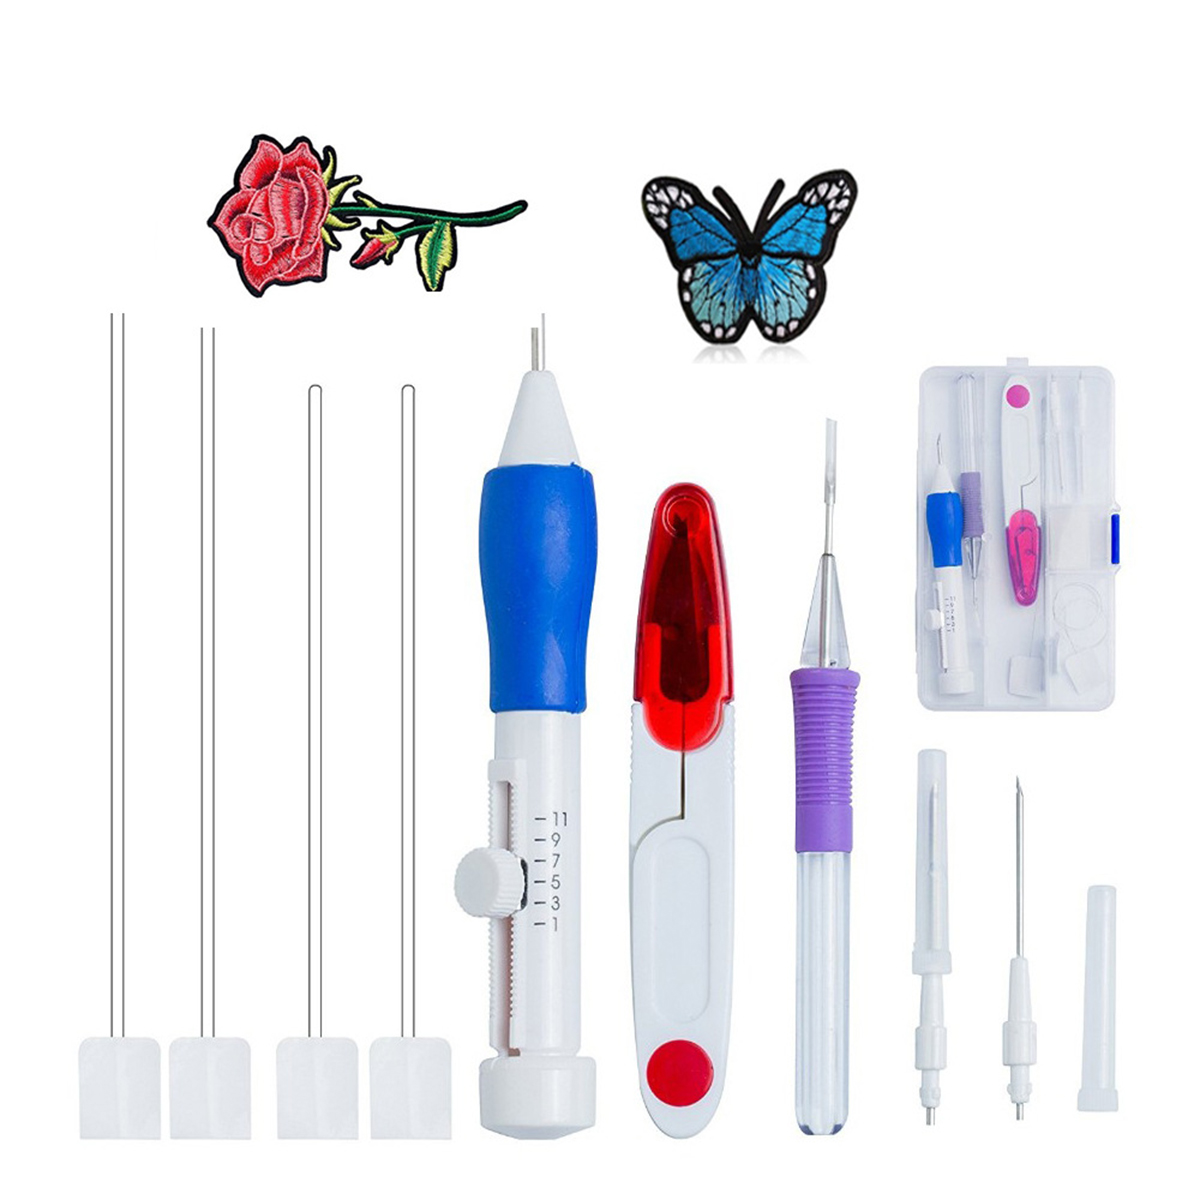 DIY-Embroidery-Pen-Set-Knitting-Sewing-Tools-Kit-Punch-Needle-Adjustable-1634278-1